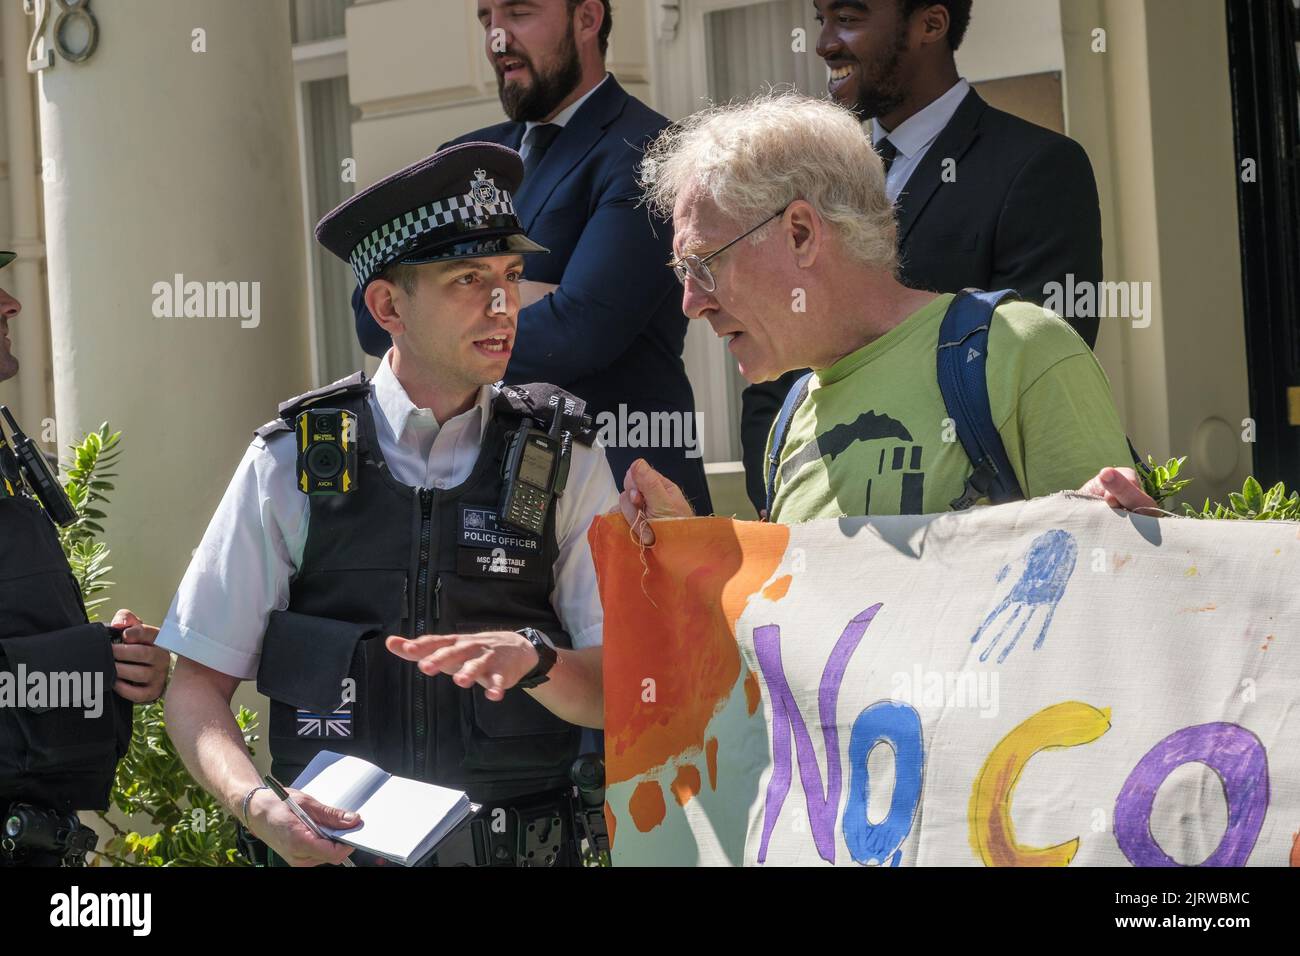 London, UK. 26th Aug, 2022. Police harass Phulbari Solidarity Group at the vigil at the Bangladesh High Commission on the 16th anniversary of the Phulbari Massacre. 3 people were shot dead at a huge non-violent protest against London mining company GCM's plans to forcibly displace 130,000 people and open cast mine 572 million tons of coal over 30 years. GCM still sells shares on the London Stock Exchange despite having no contract to mine. Credit: Peter Marshall/Alamy Live News Stock Photo